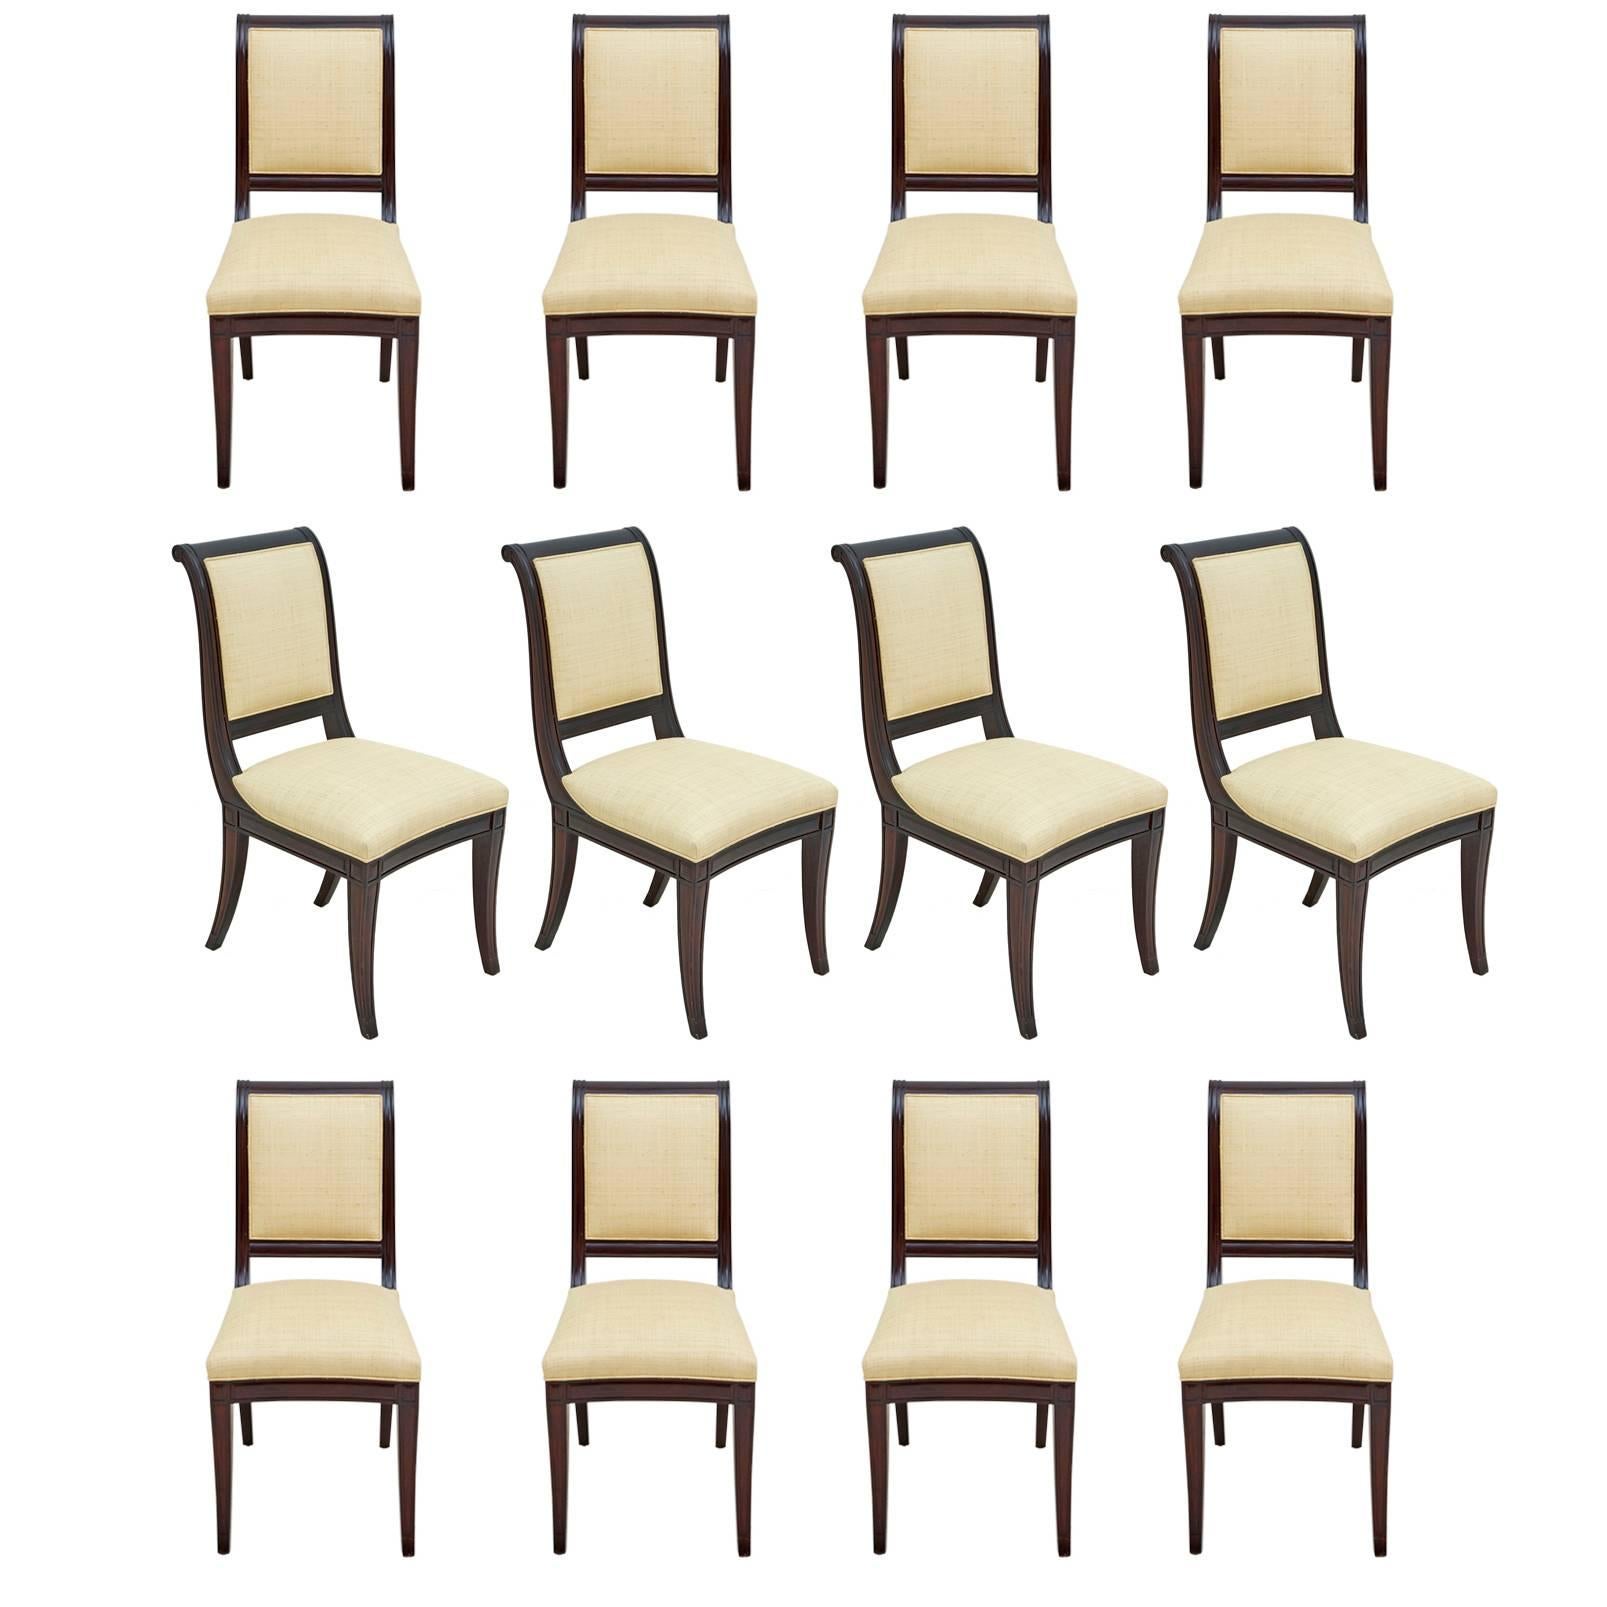 Set of 12 British Colonial Mahogany Dining Chairs Upholstered in Madagascar